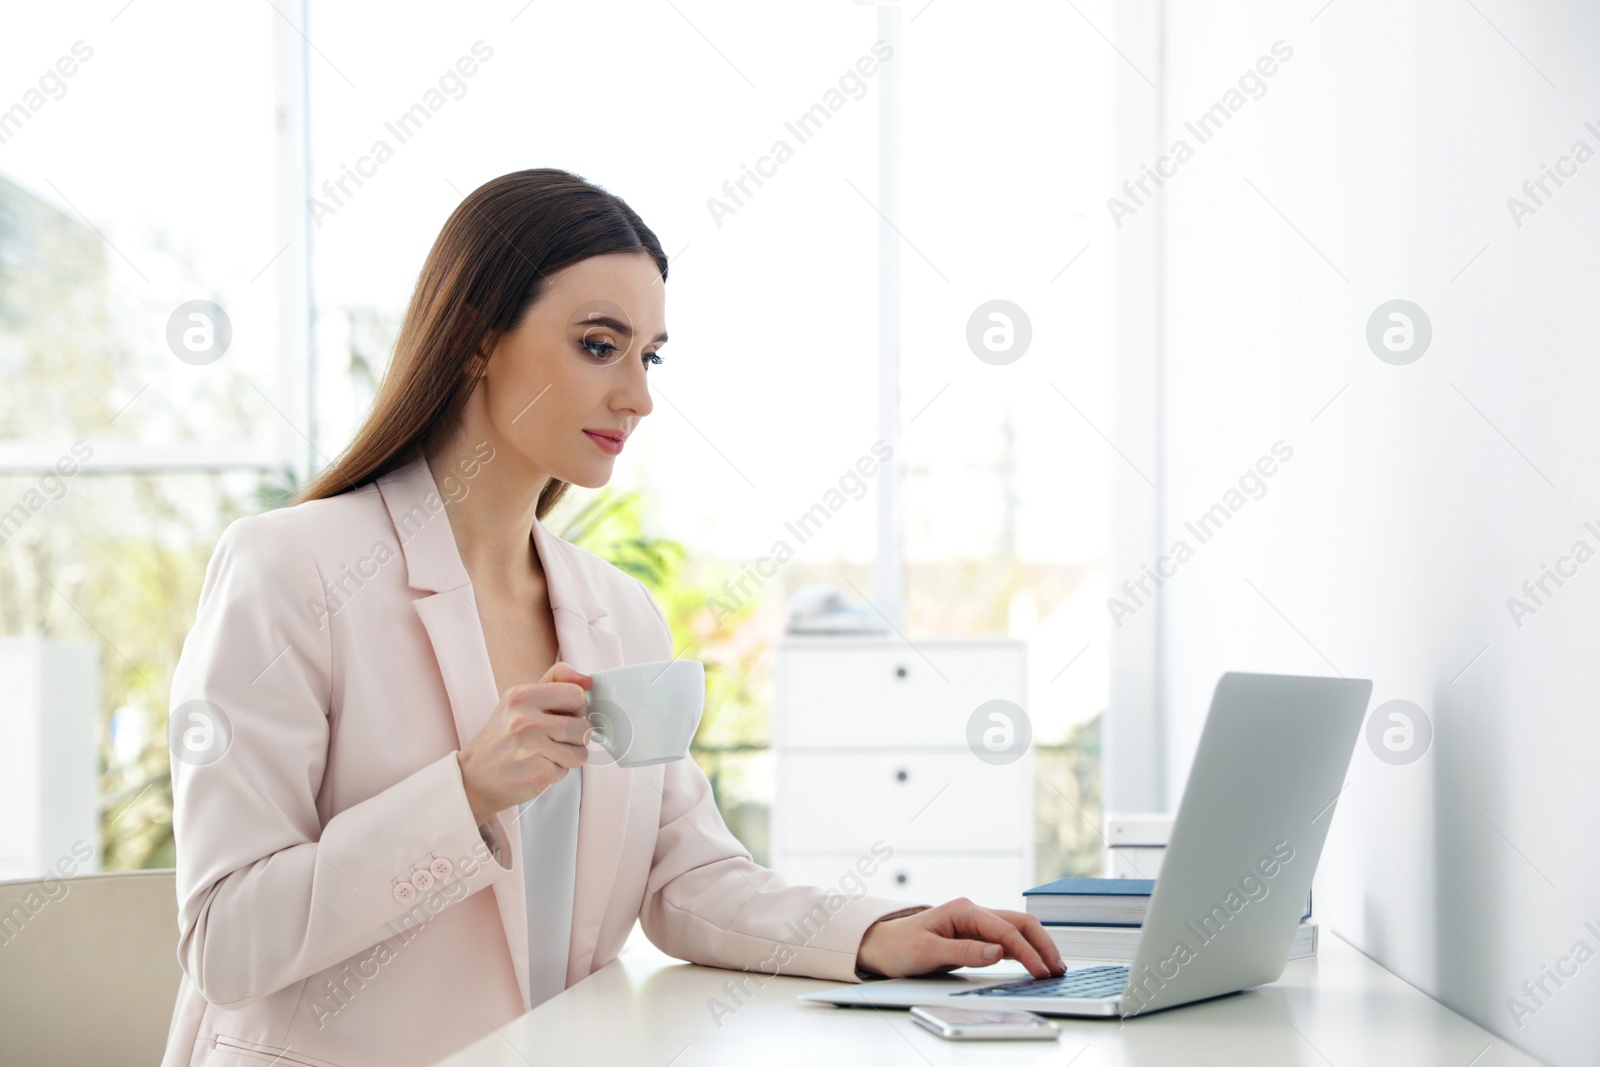 Image of Young woman drinking coffee while working on laptop in office